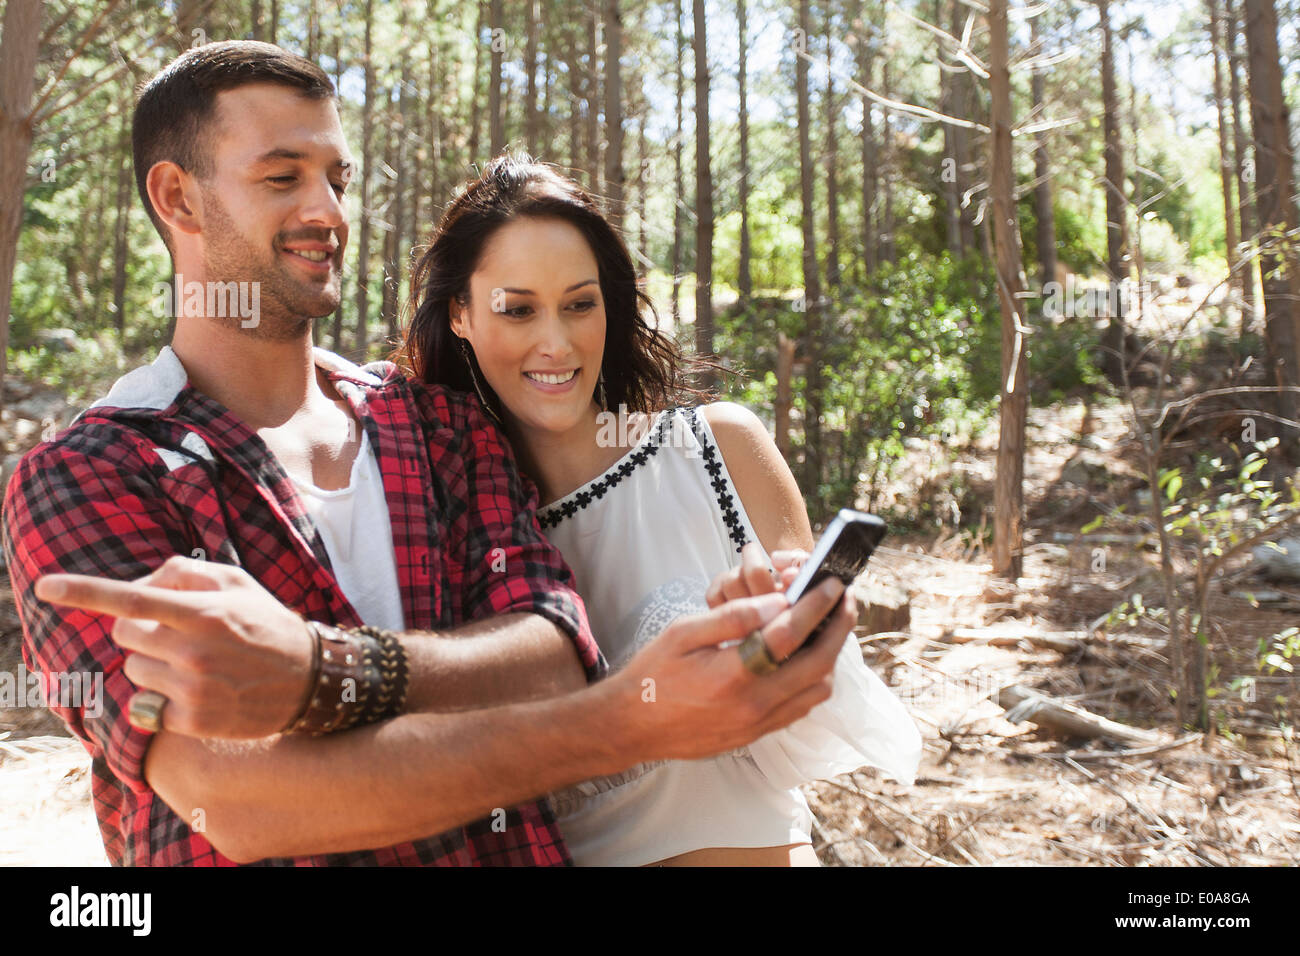 Young couple in forest, man pointing Stock Photo